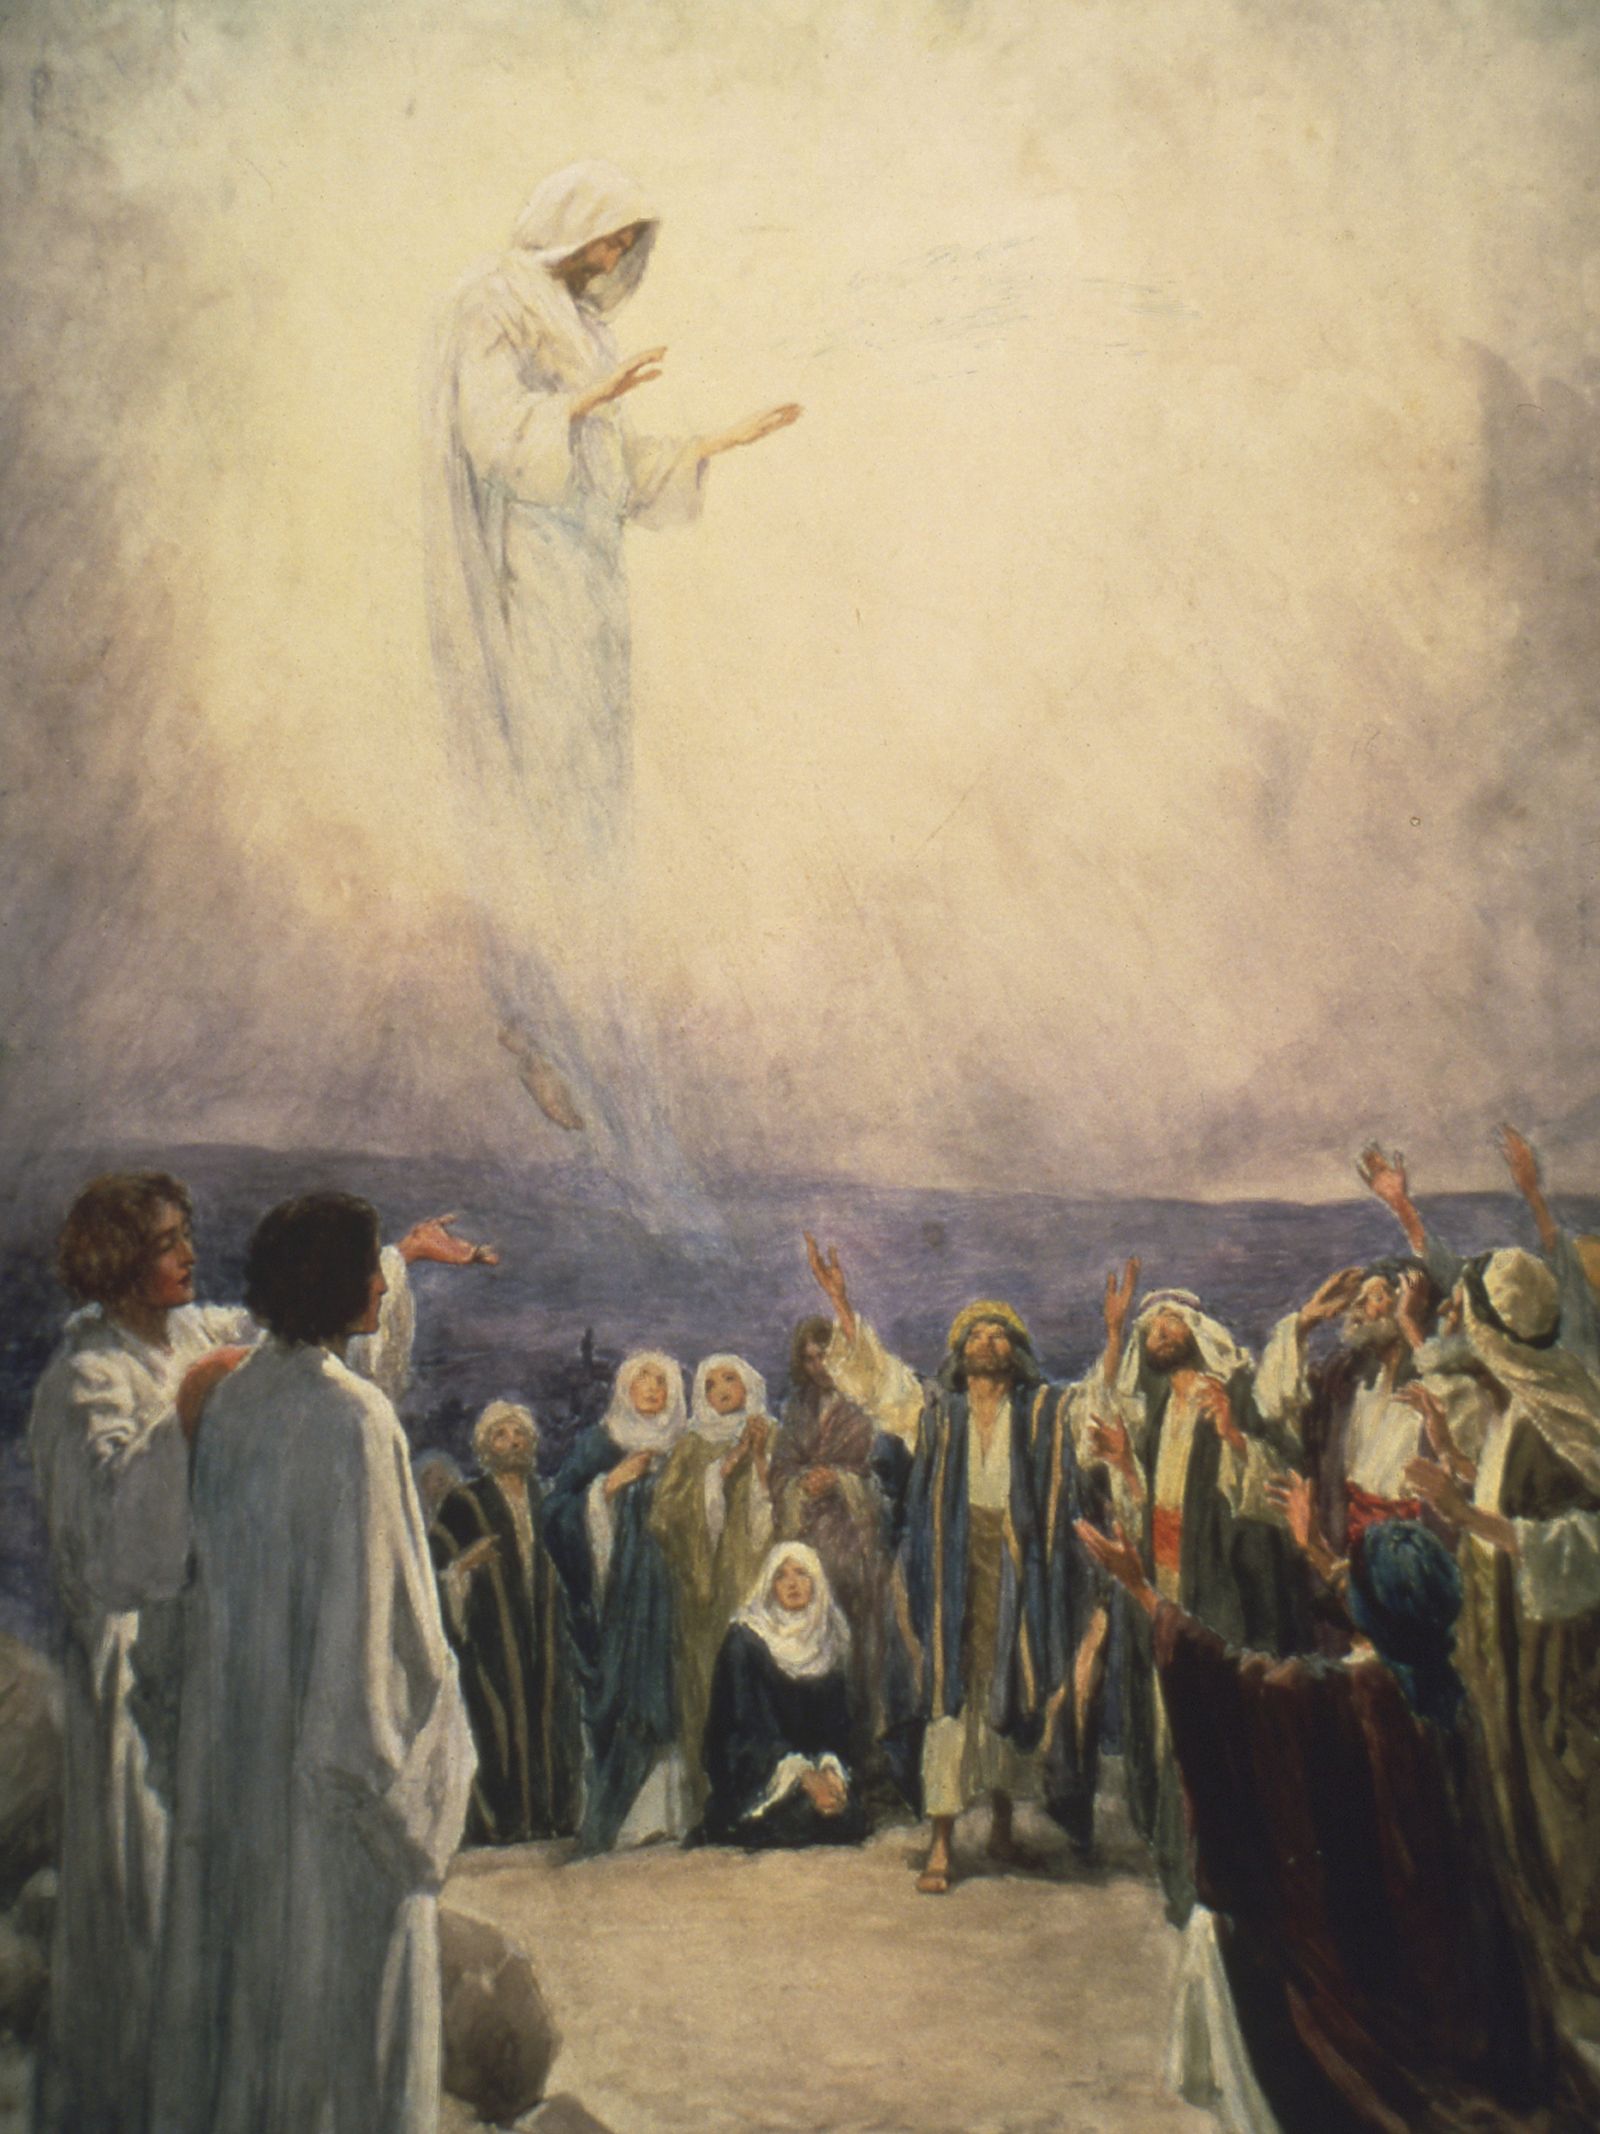 The Lord’s Ascension, by William Henry Margetson.